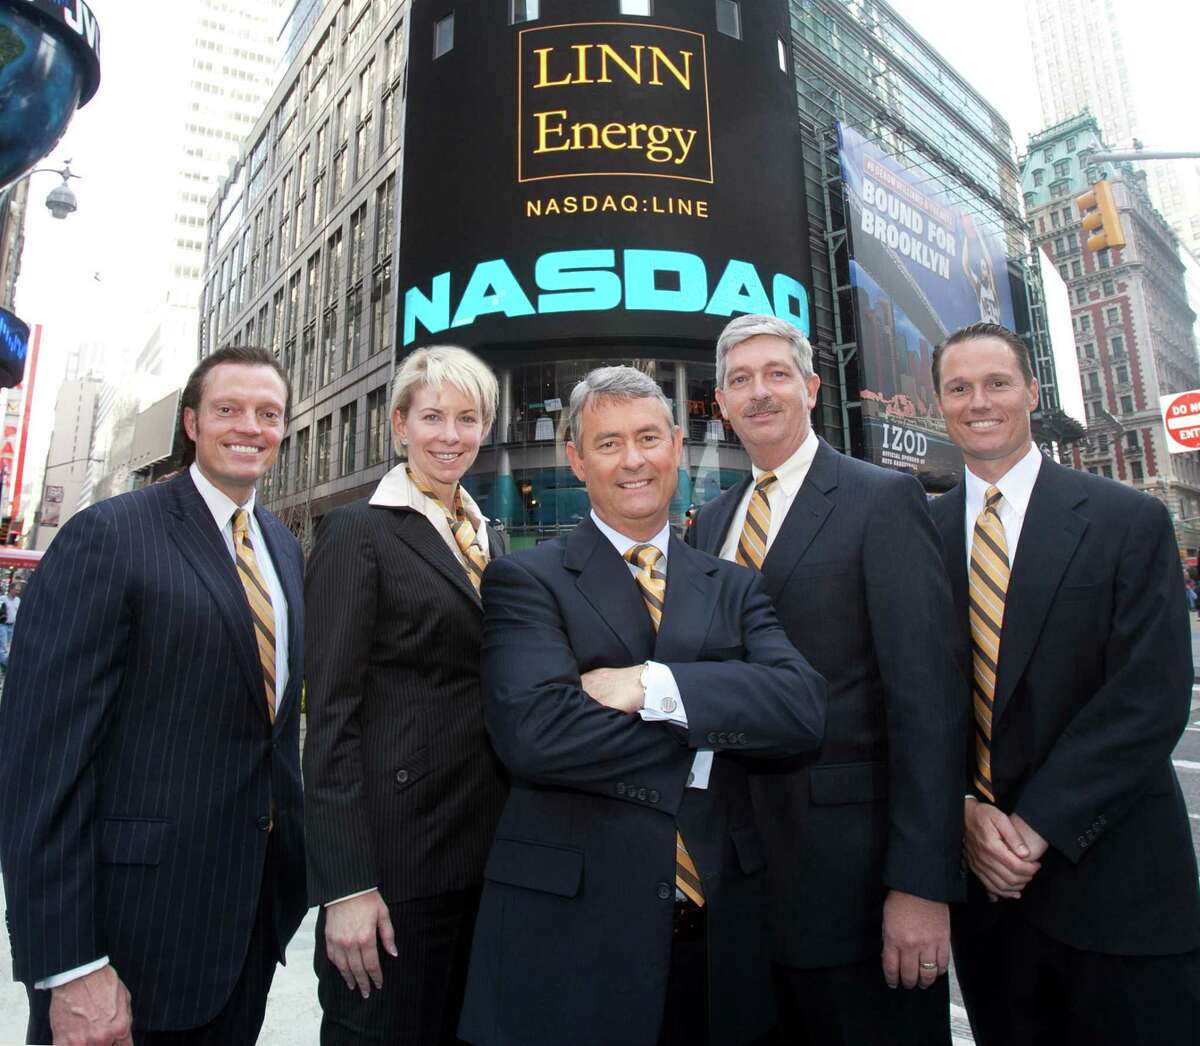 Linn Energy CFO Kolja Rockov, Senior Vice President and General Counsel Charlene Ripley, Chairman, President & CEO Mark Ellis, COO Arden Walker, and Senior Vice President of Business Development David Rottino celebrated Linn s fifth anniversary as a publicly traded company by ringing the Nasdaq closing bell in April 2011. Several local unitholders joined them for the event, and they all wore ties with Linn colors.